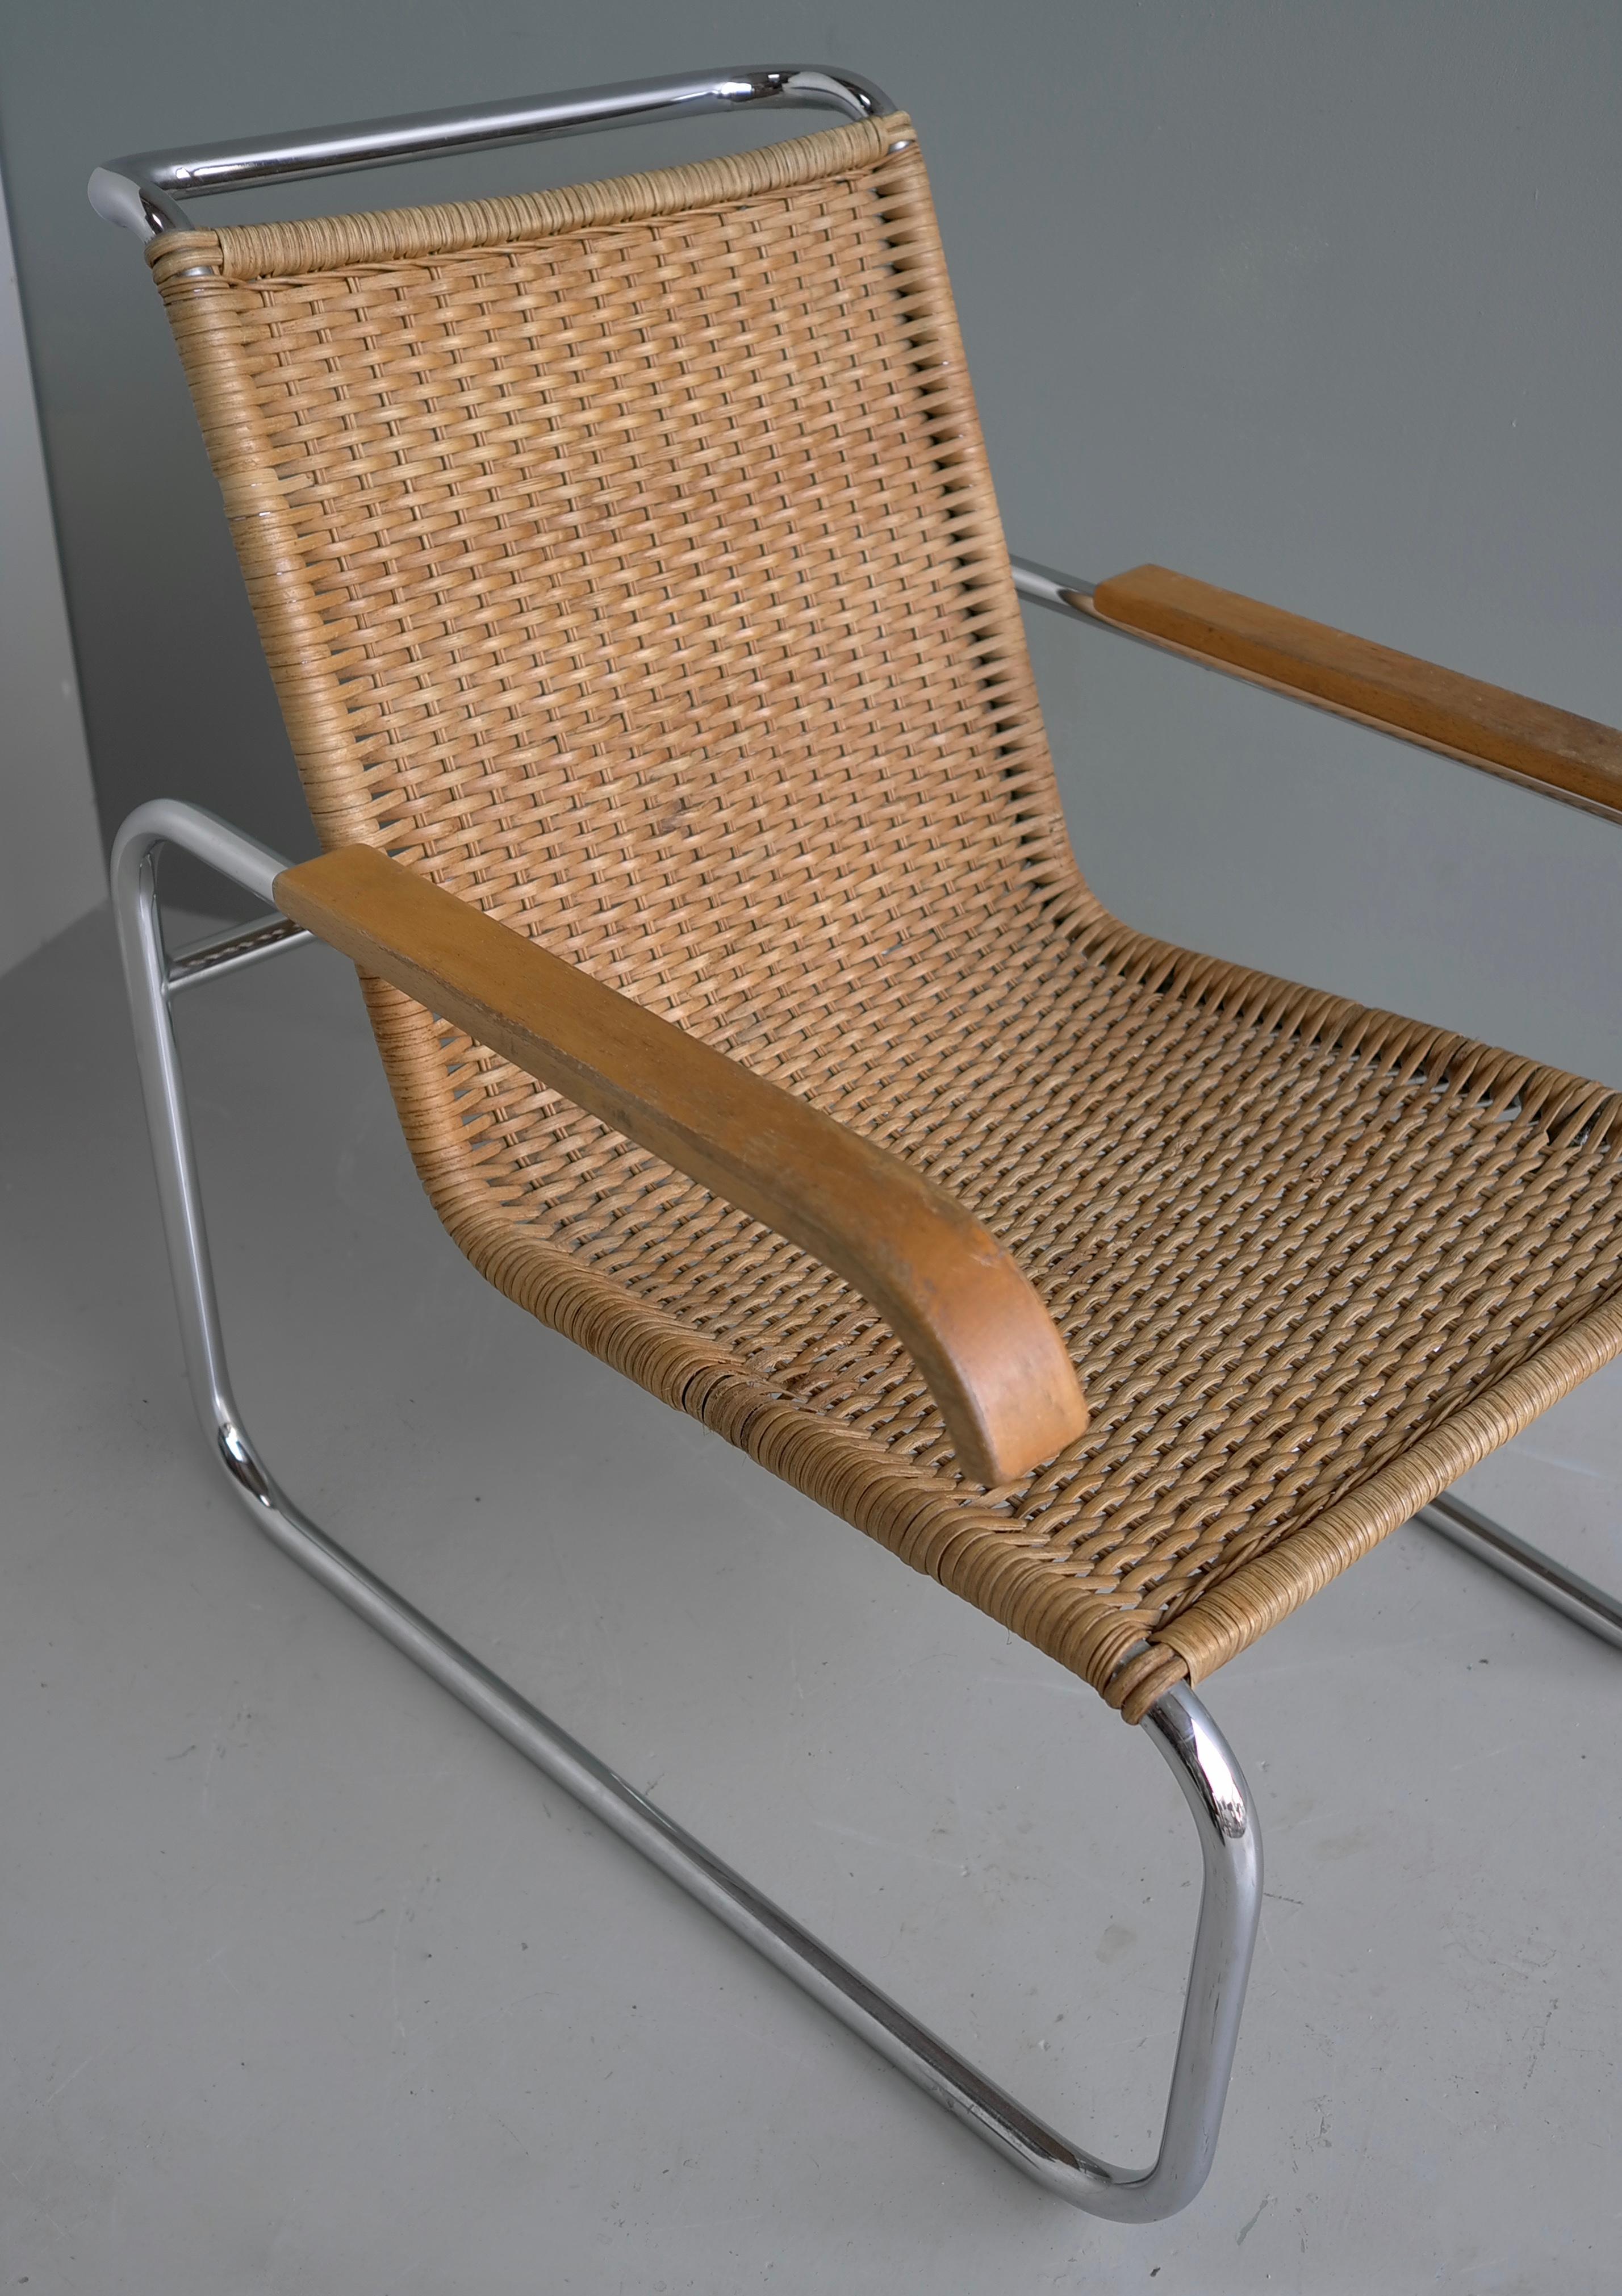 Marcel Breuer B35 Wicker and Chrome Armchair by Thonet 1960's For Sale 4